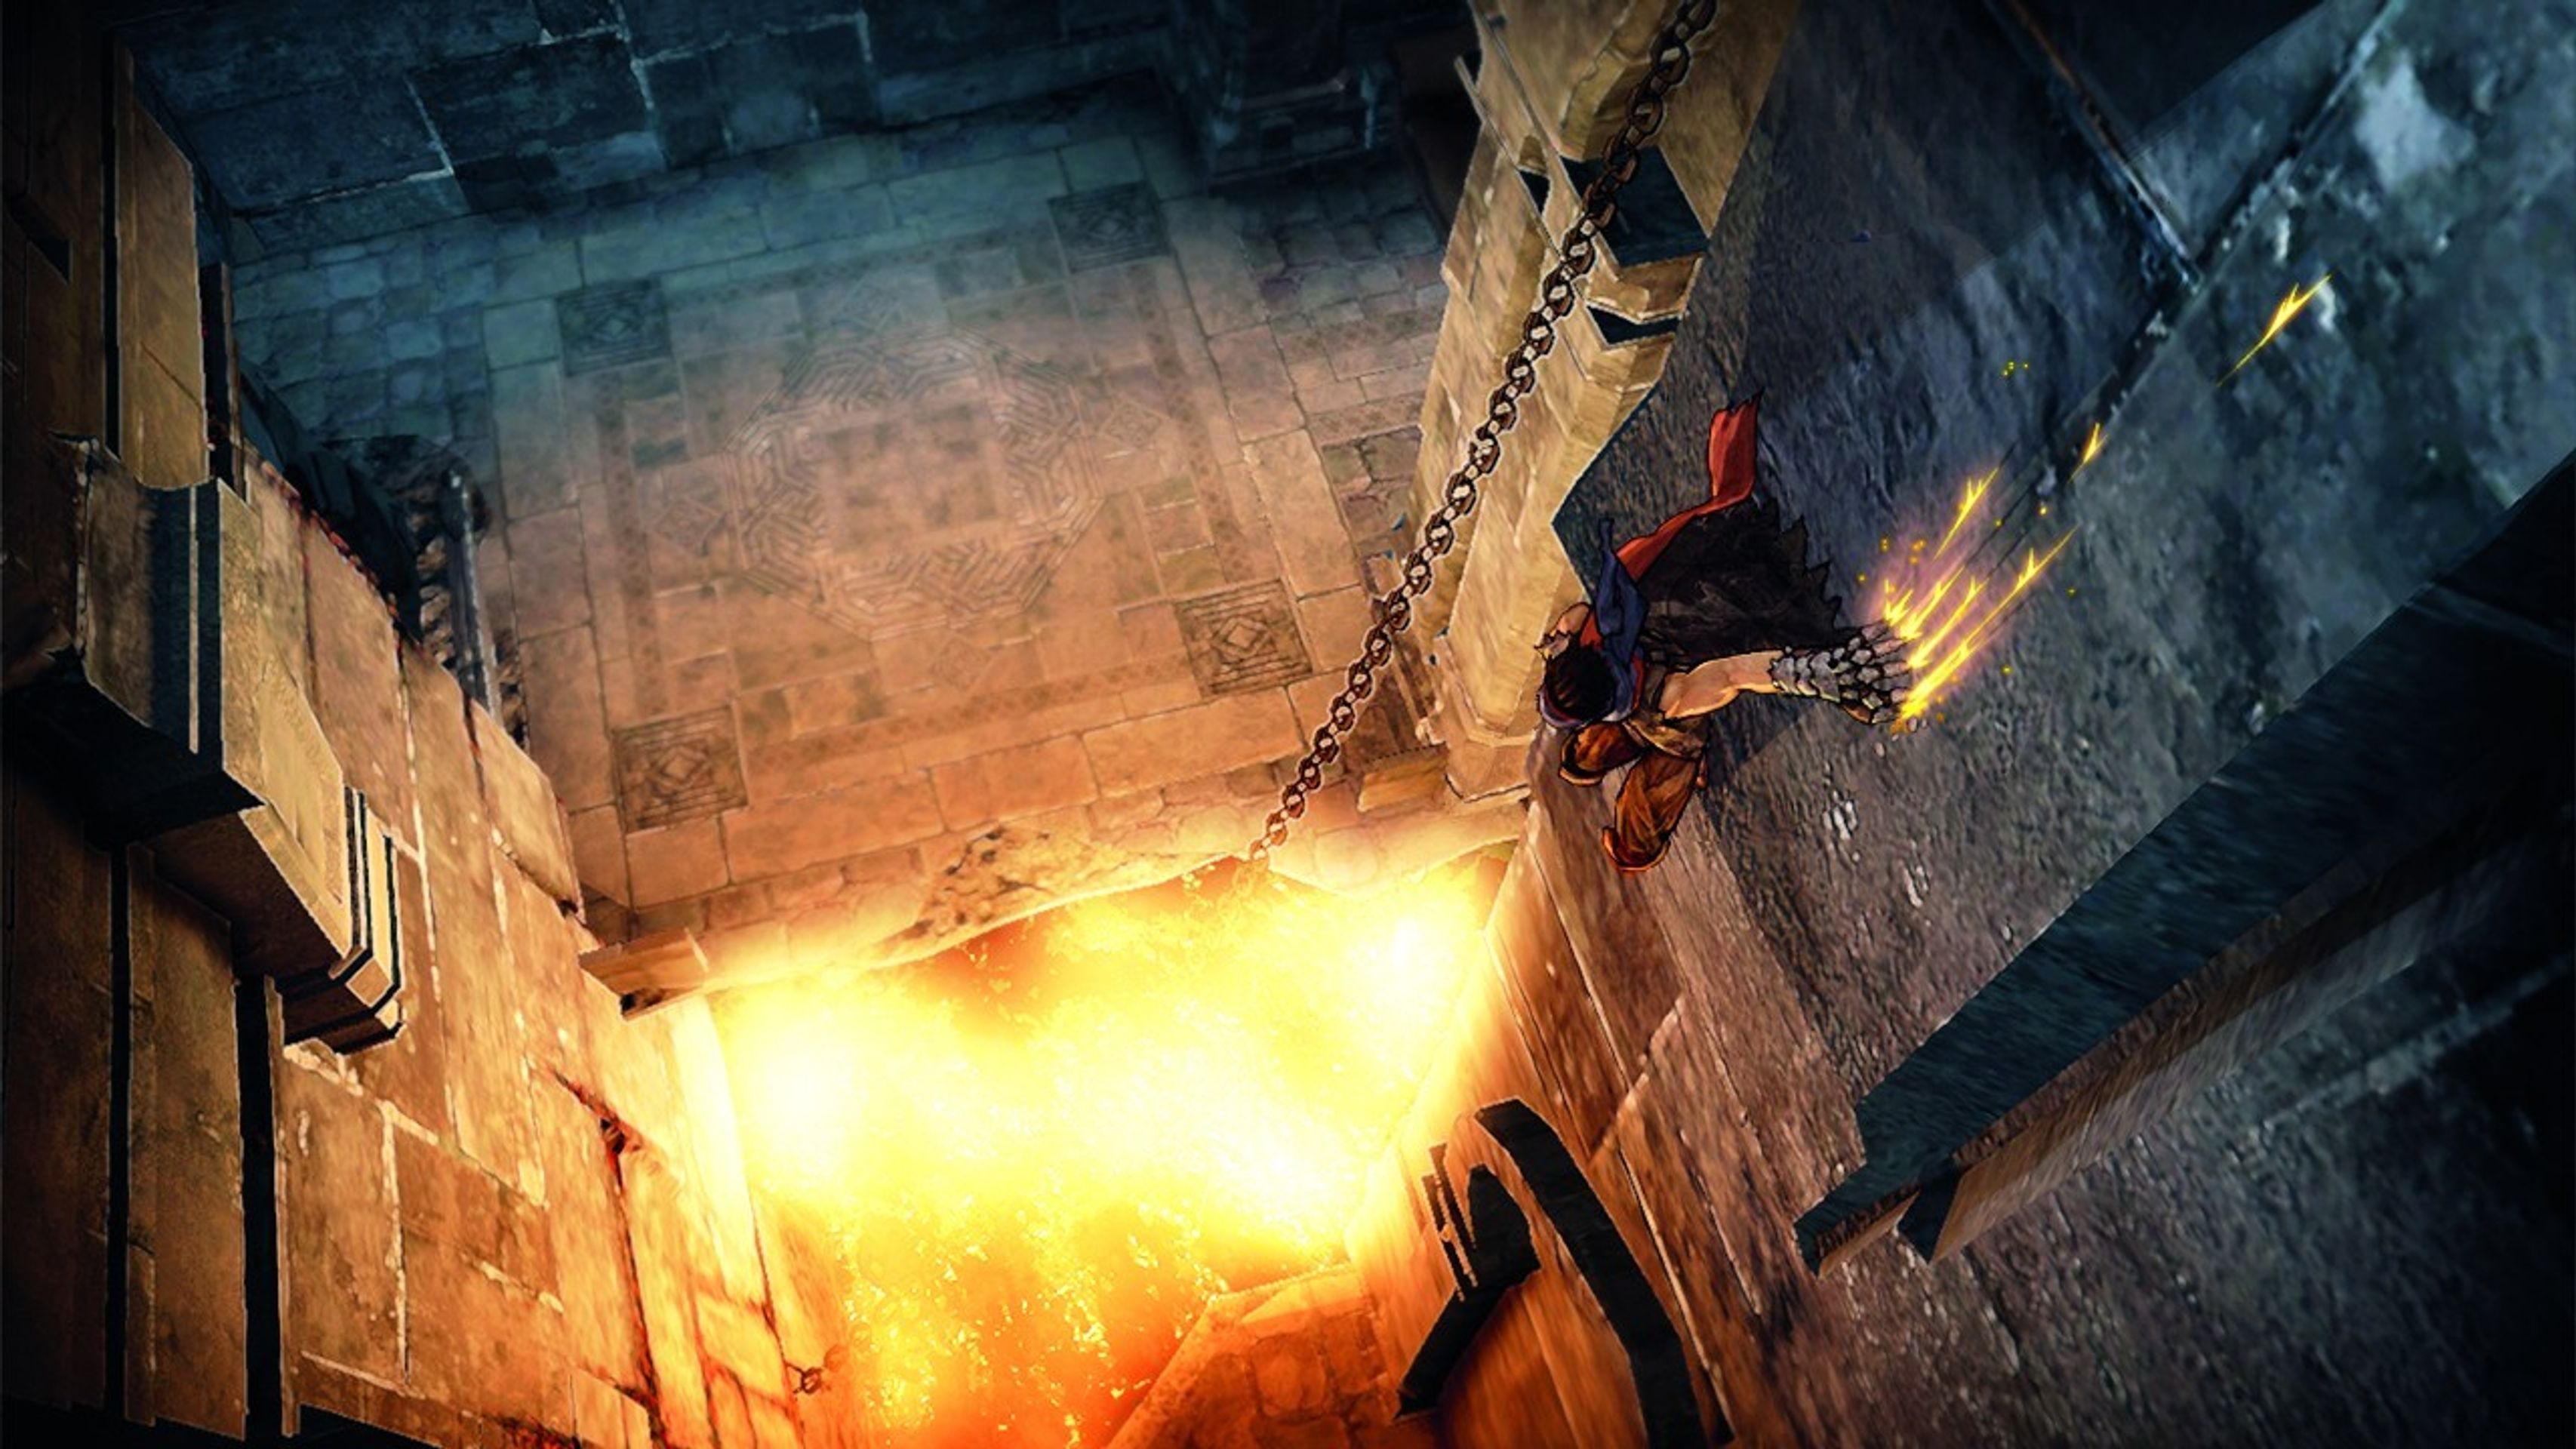 Prince of Persia - Prince of Persia galerie (3/7)